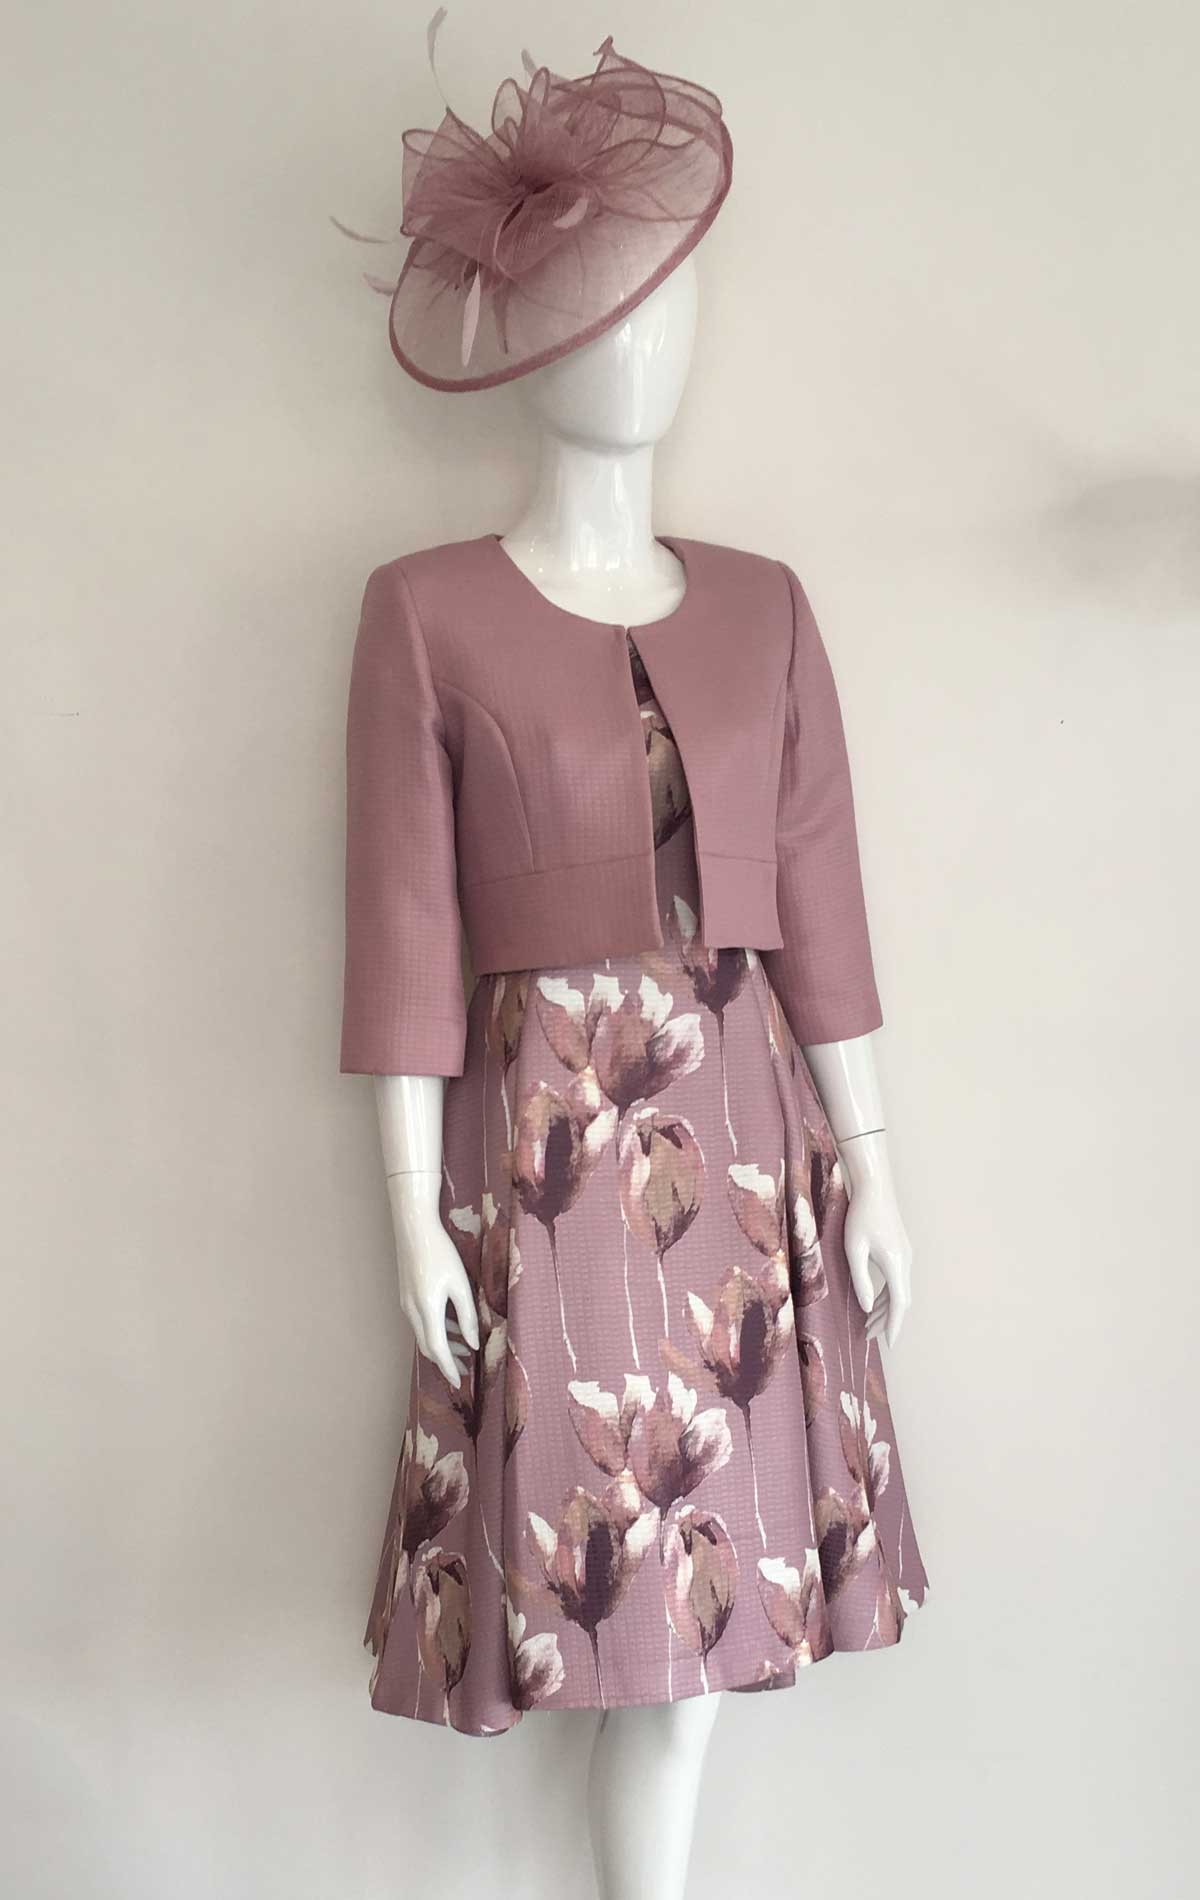 2447 - Size 8 - Ella Boo 2447/1647 Hi Low Rose Print Dress with Cap sleeves & contemporary jacket with 3/4 length sleeves at Blessings Occasion Wear Boutique, Brighton, East Sussex. BN1 5GG. Telephone: 01273 505766